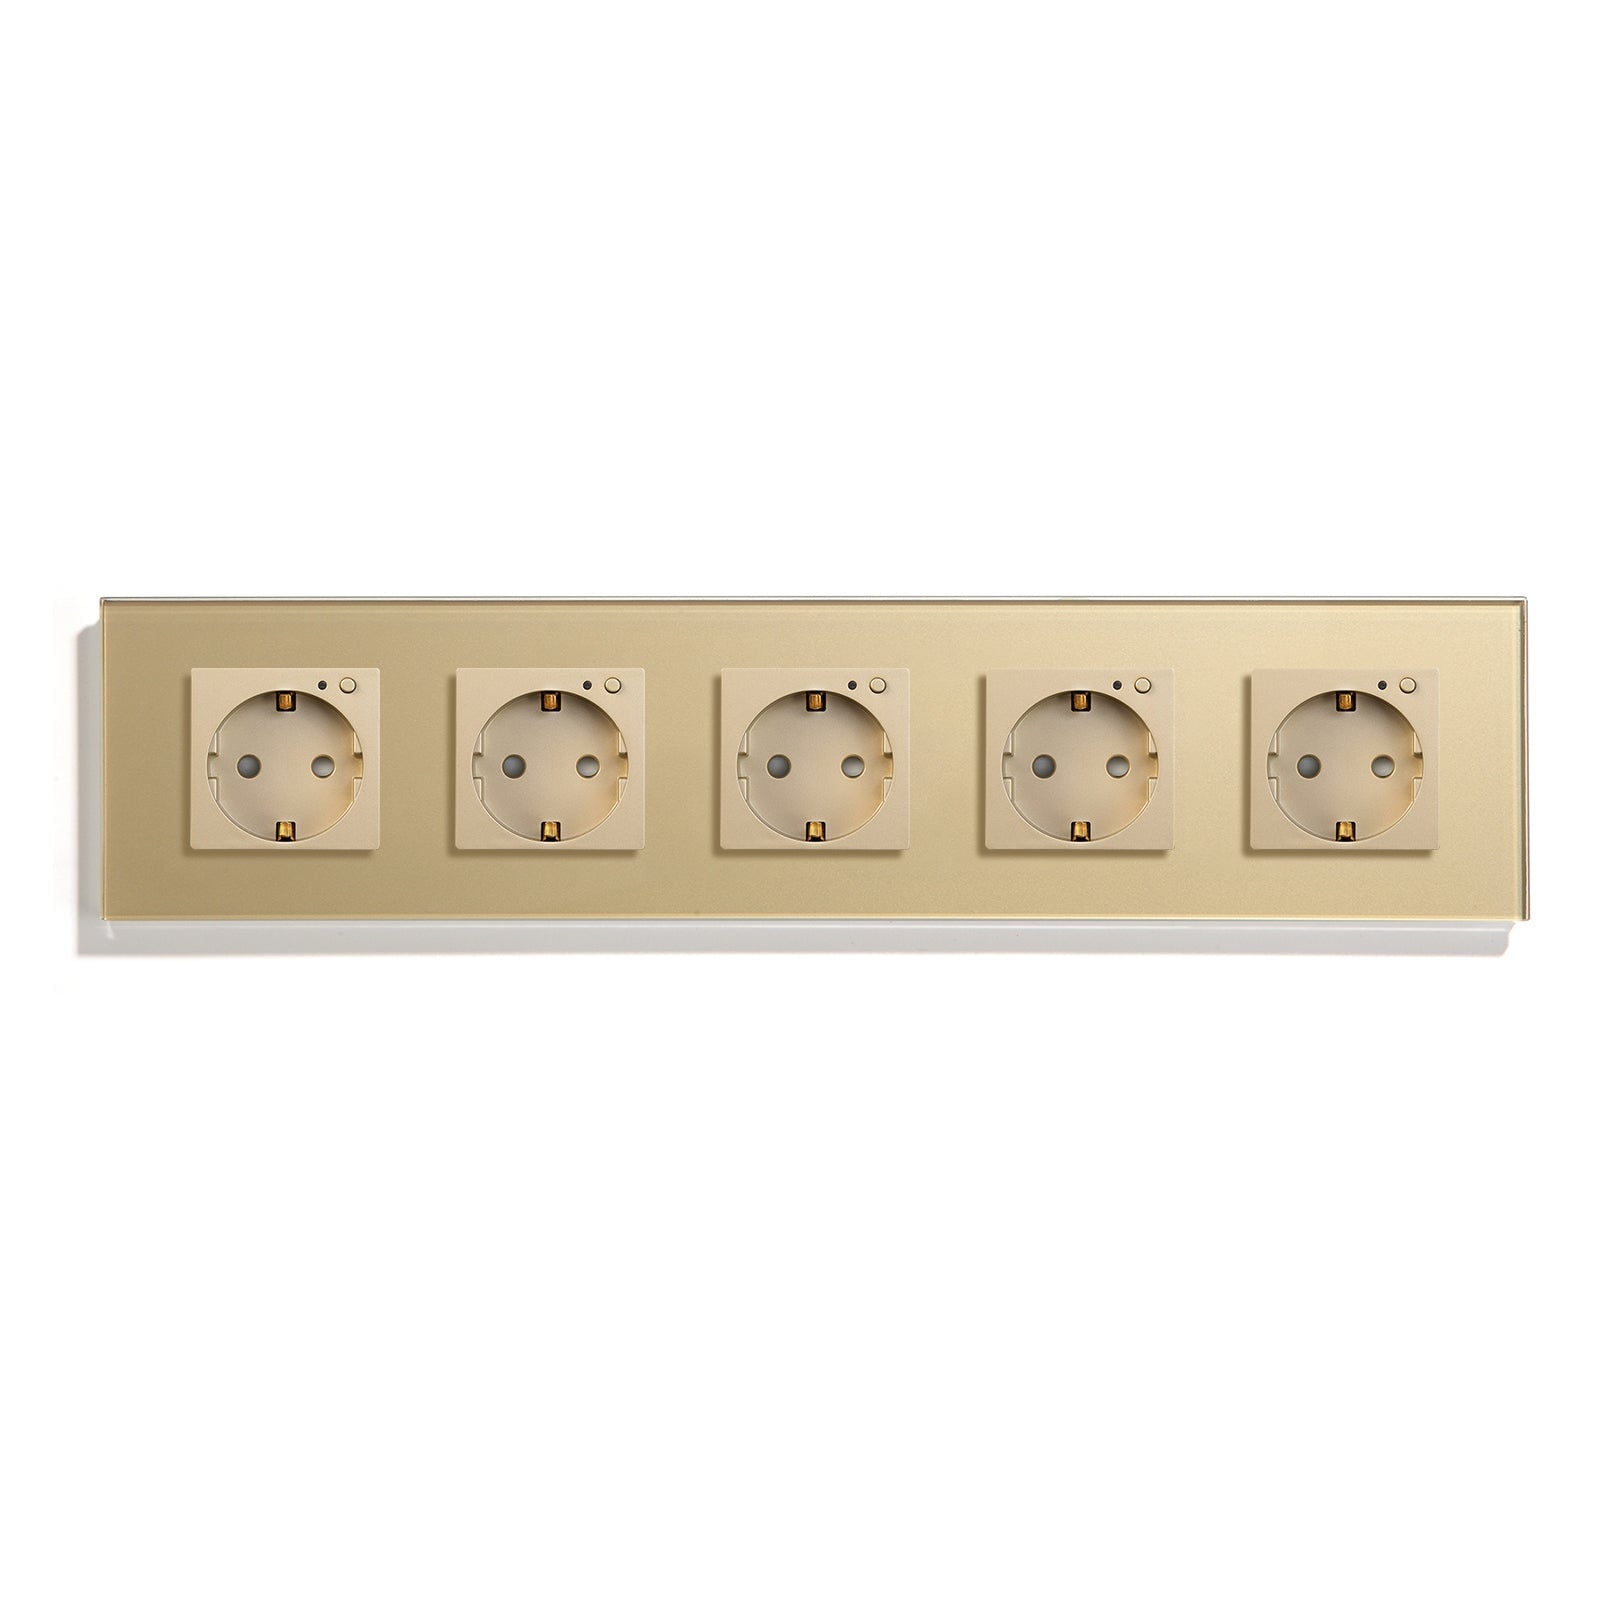 Bseed Wifi EU Standard Socket Wall Sockets With Energy Monitoring Power Outlets & Sockets Bseedswitch Golden Quintuple 